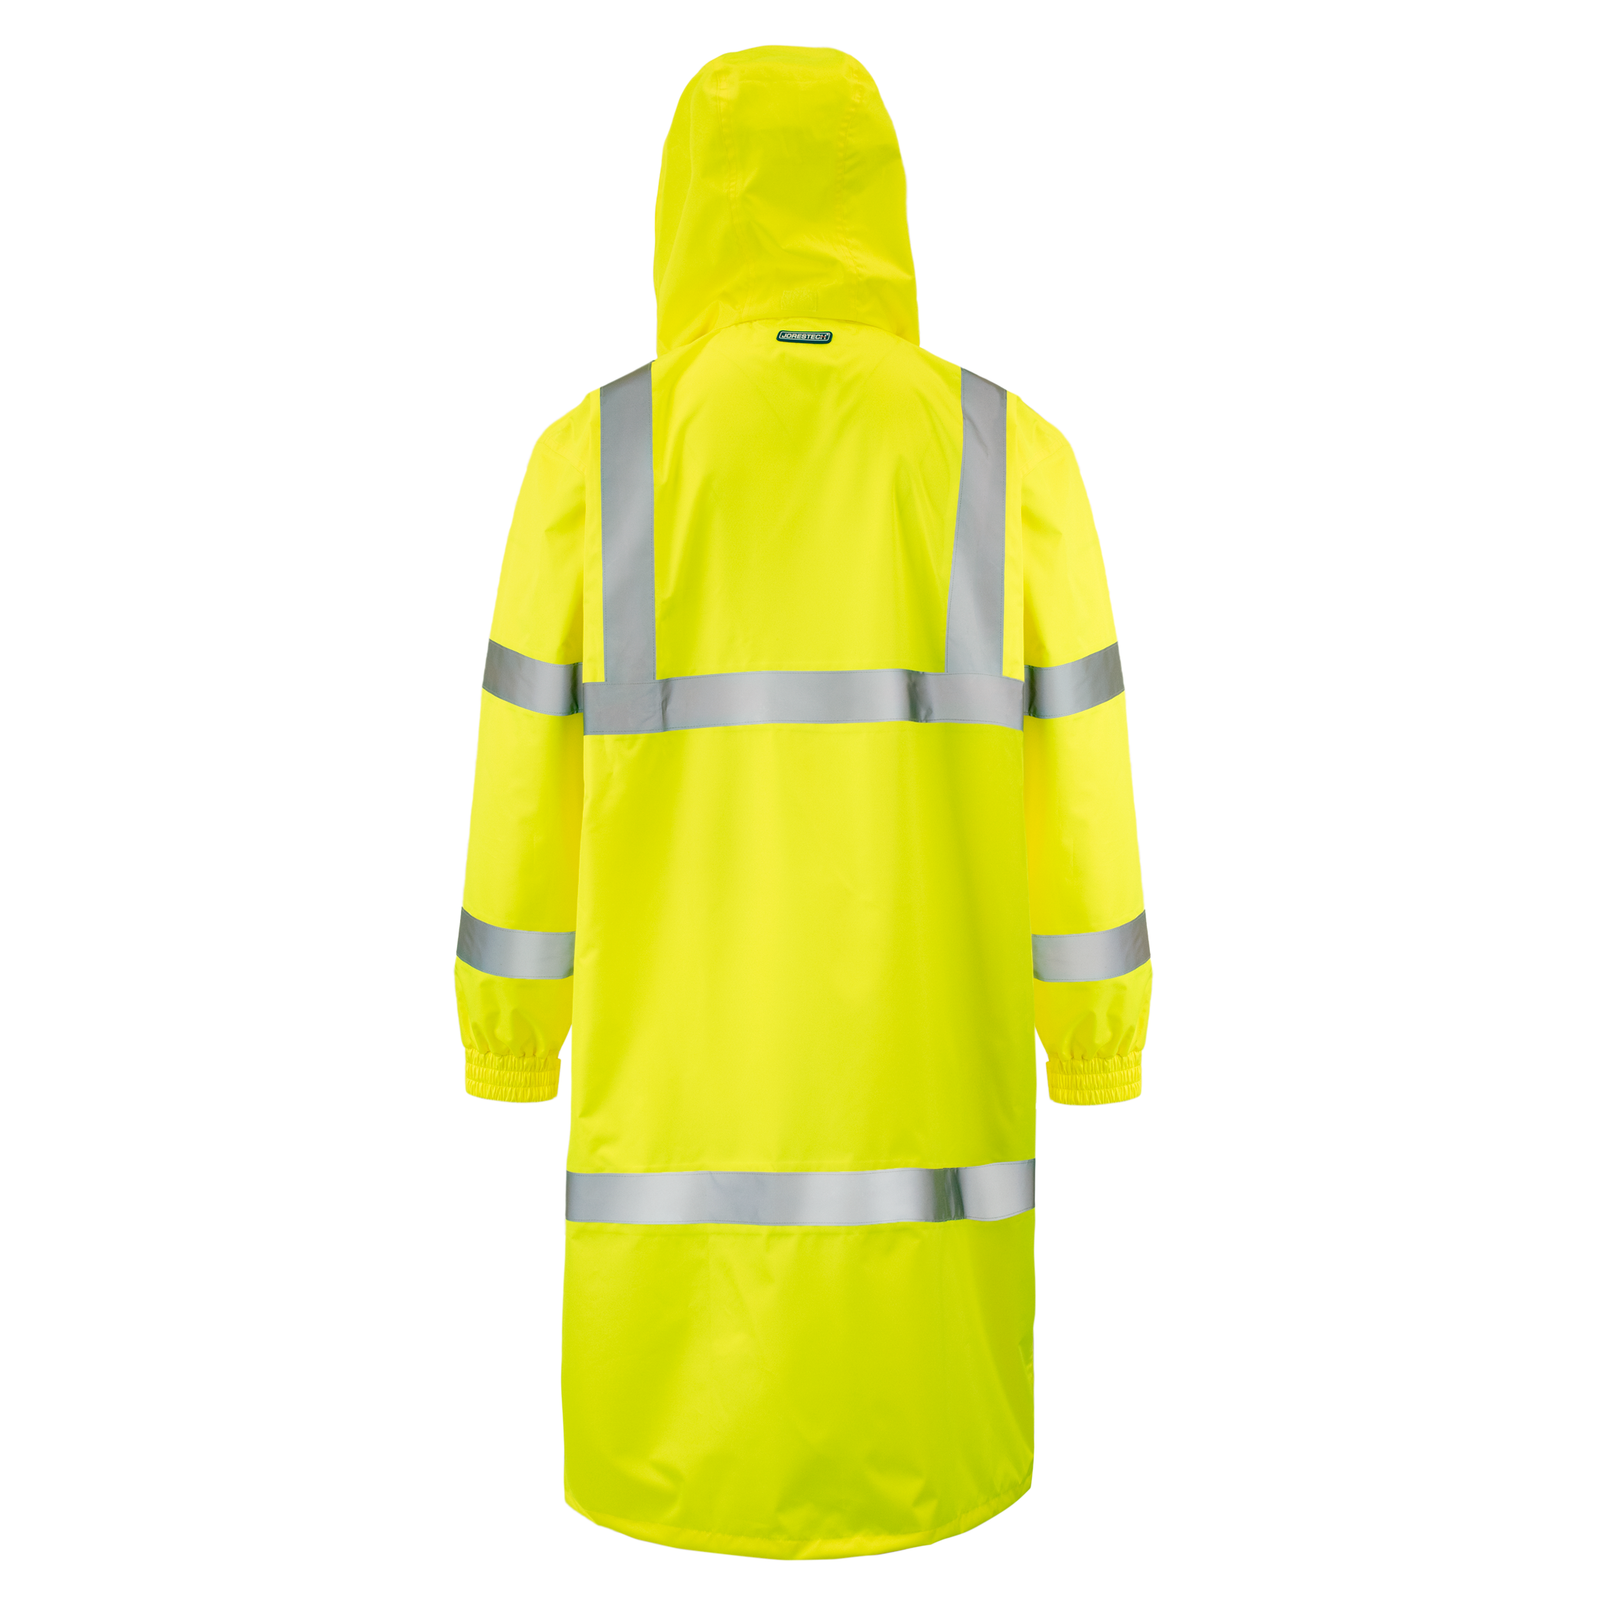 Back view of the JORESTECH Yellow Rain Coat with 2 inch reflective strips